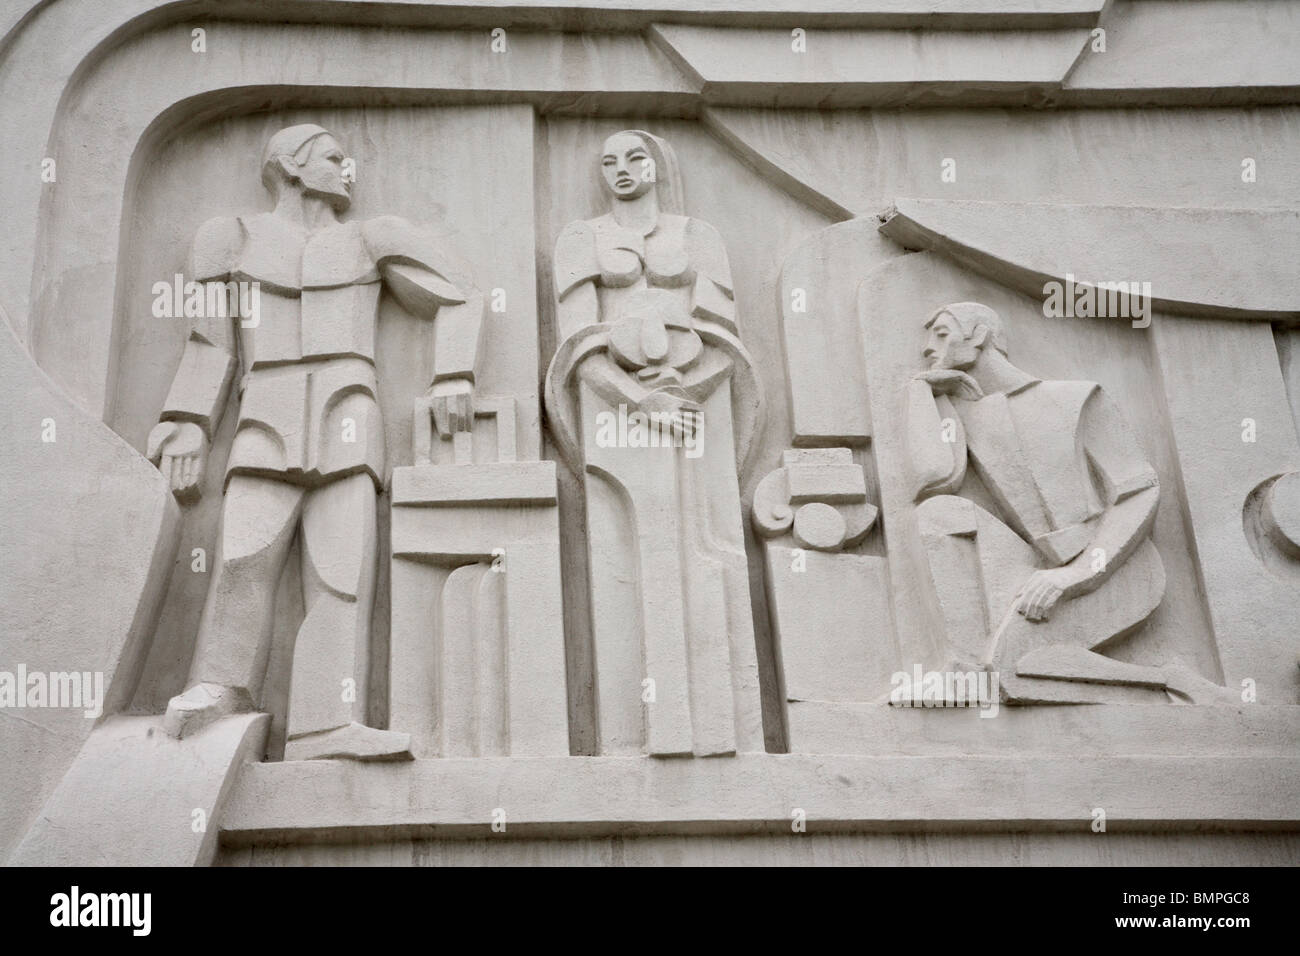 Decorative relief sculpture on the side of the airport at Bishkek, Kyrgyzstan, Middle East. Stock Photo